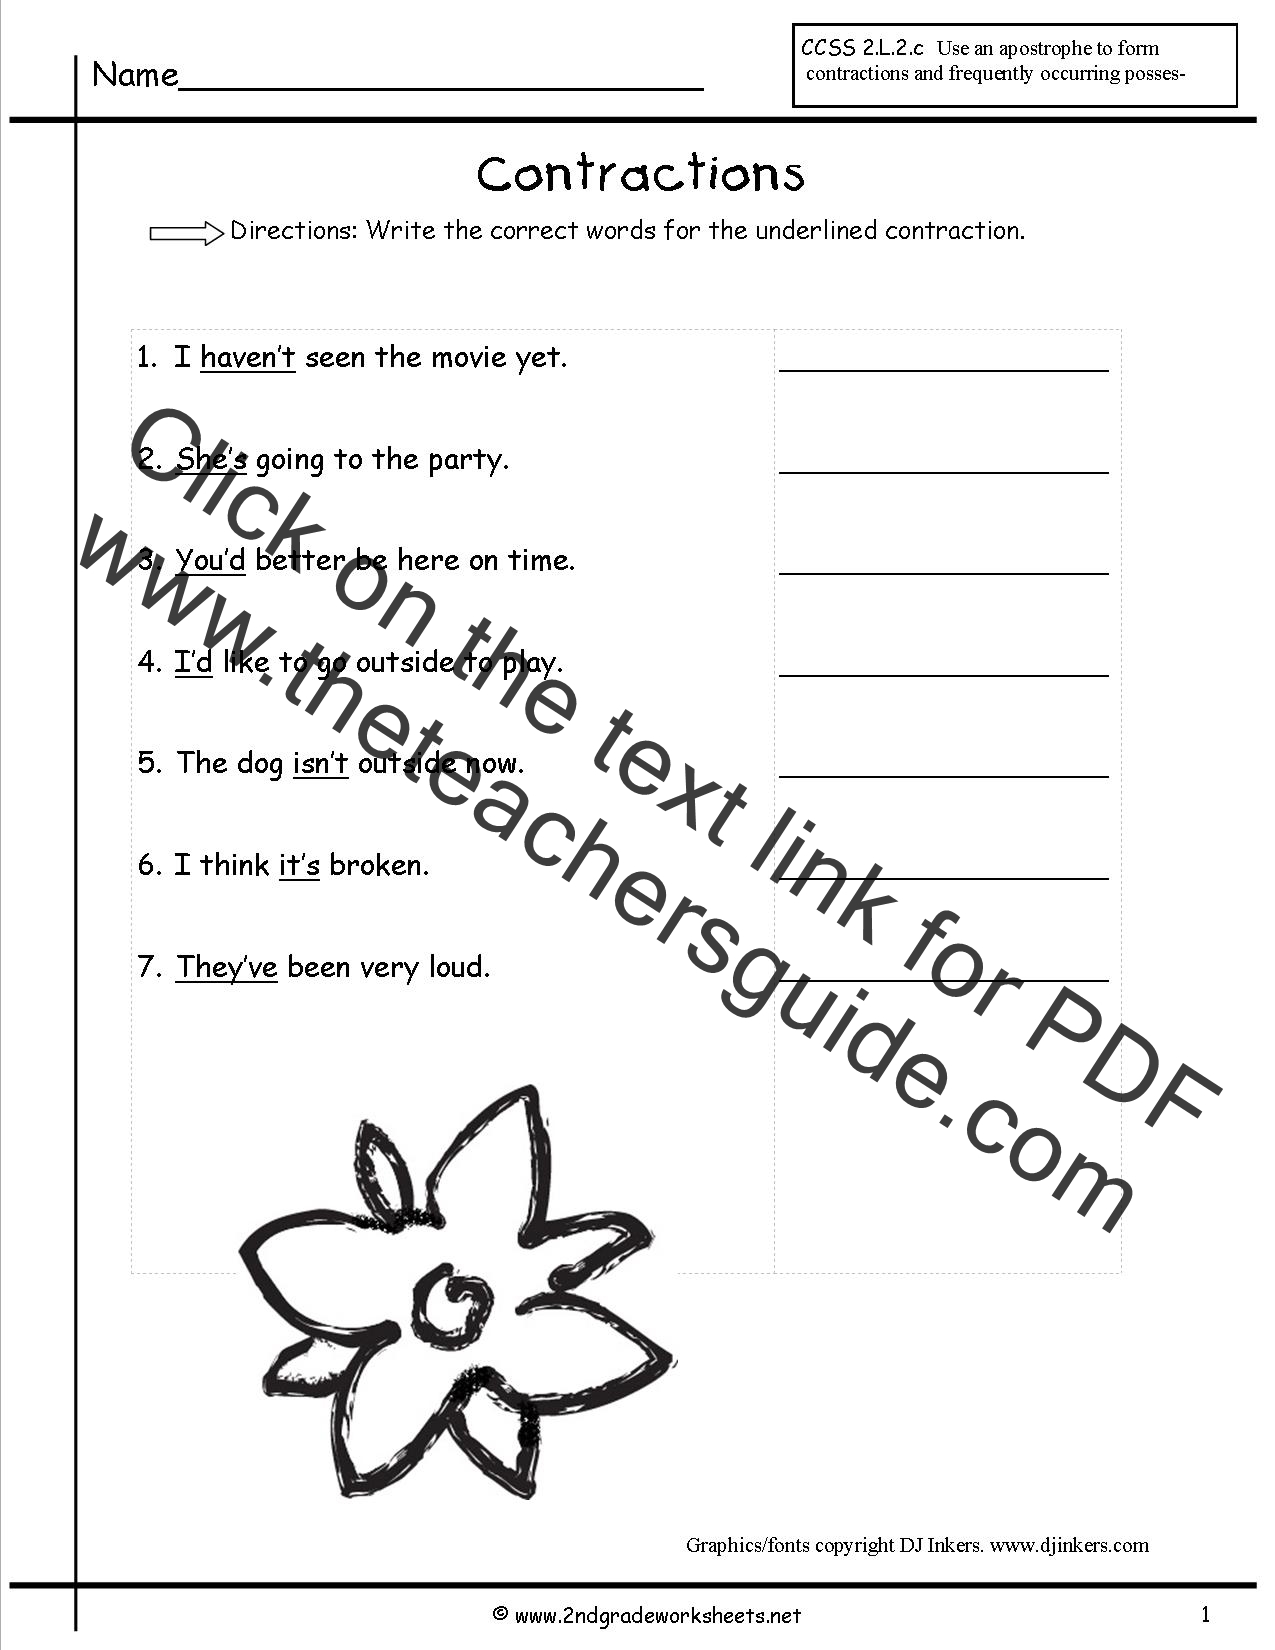 free-contractions-worksheets-and-printouts